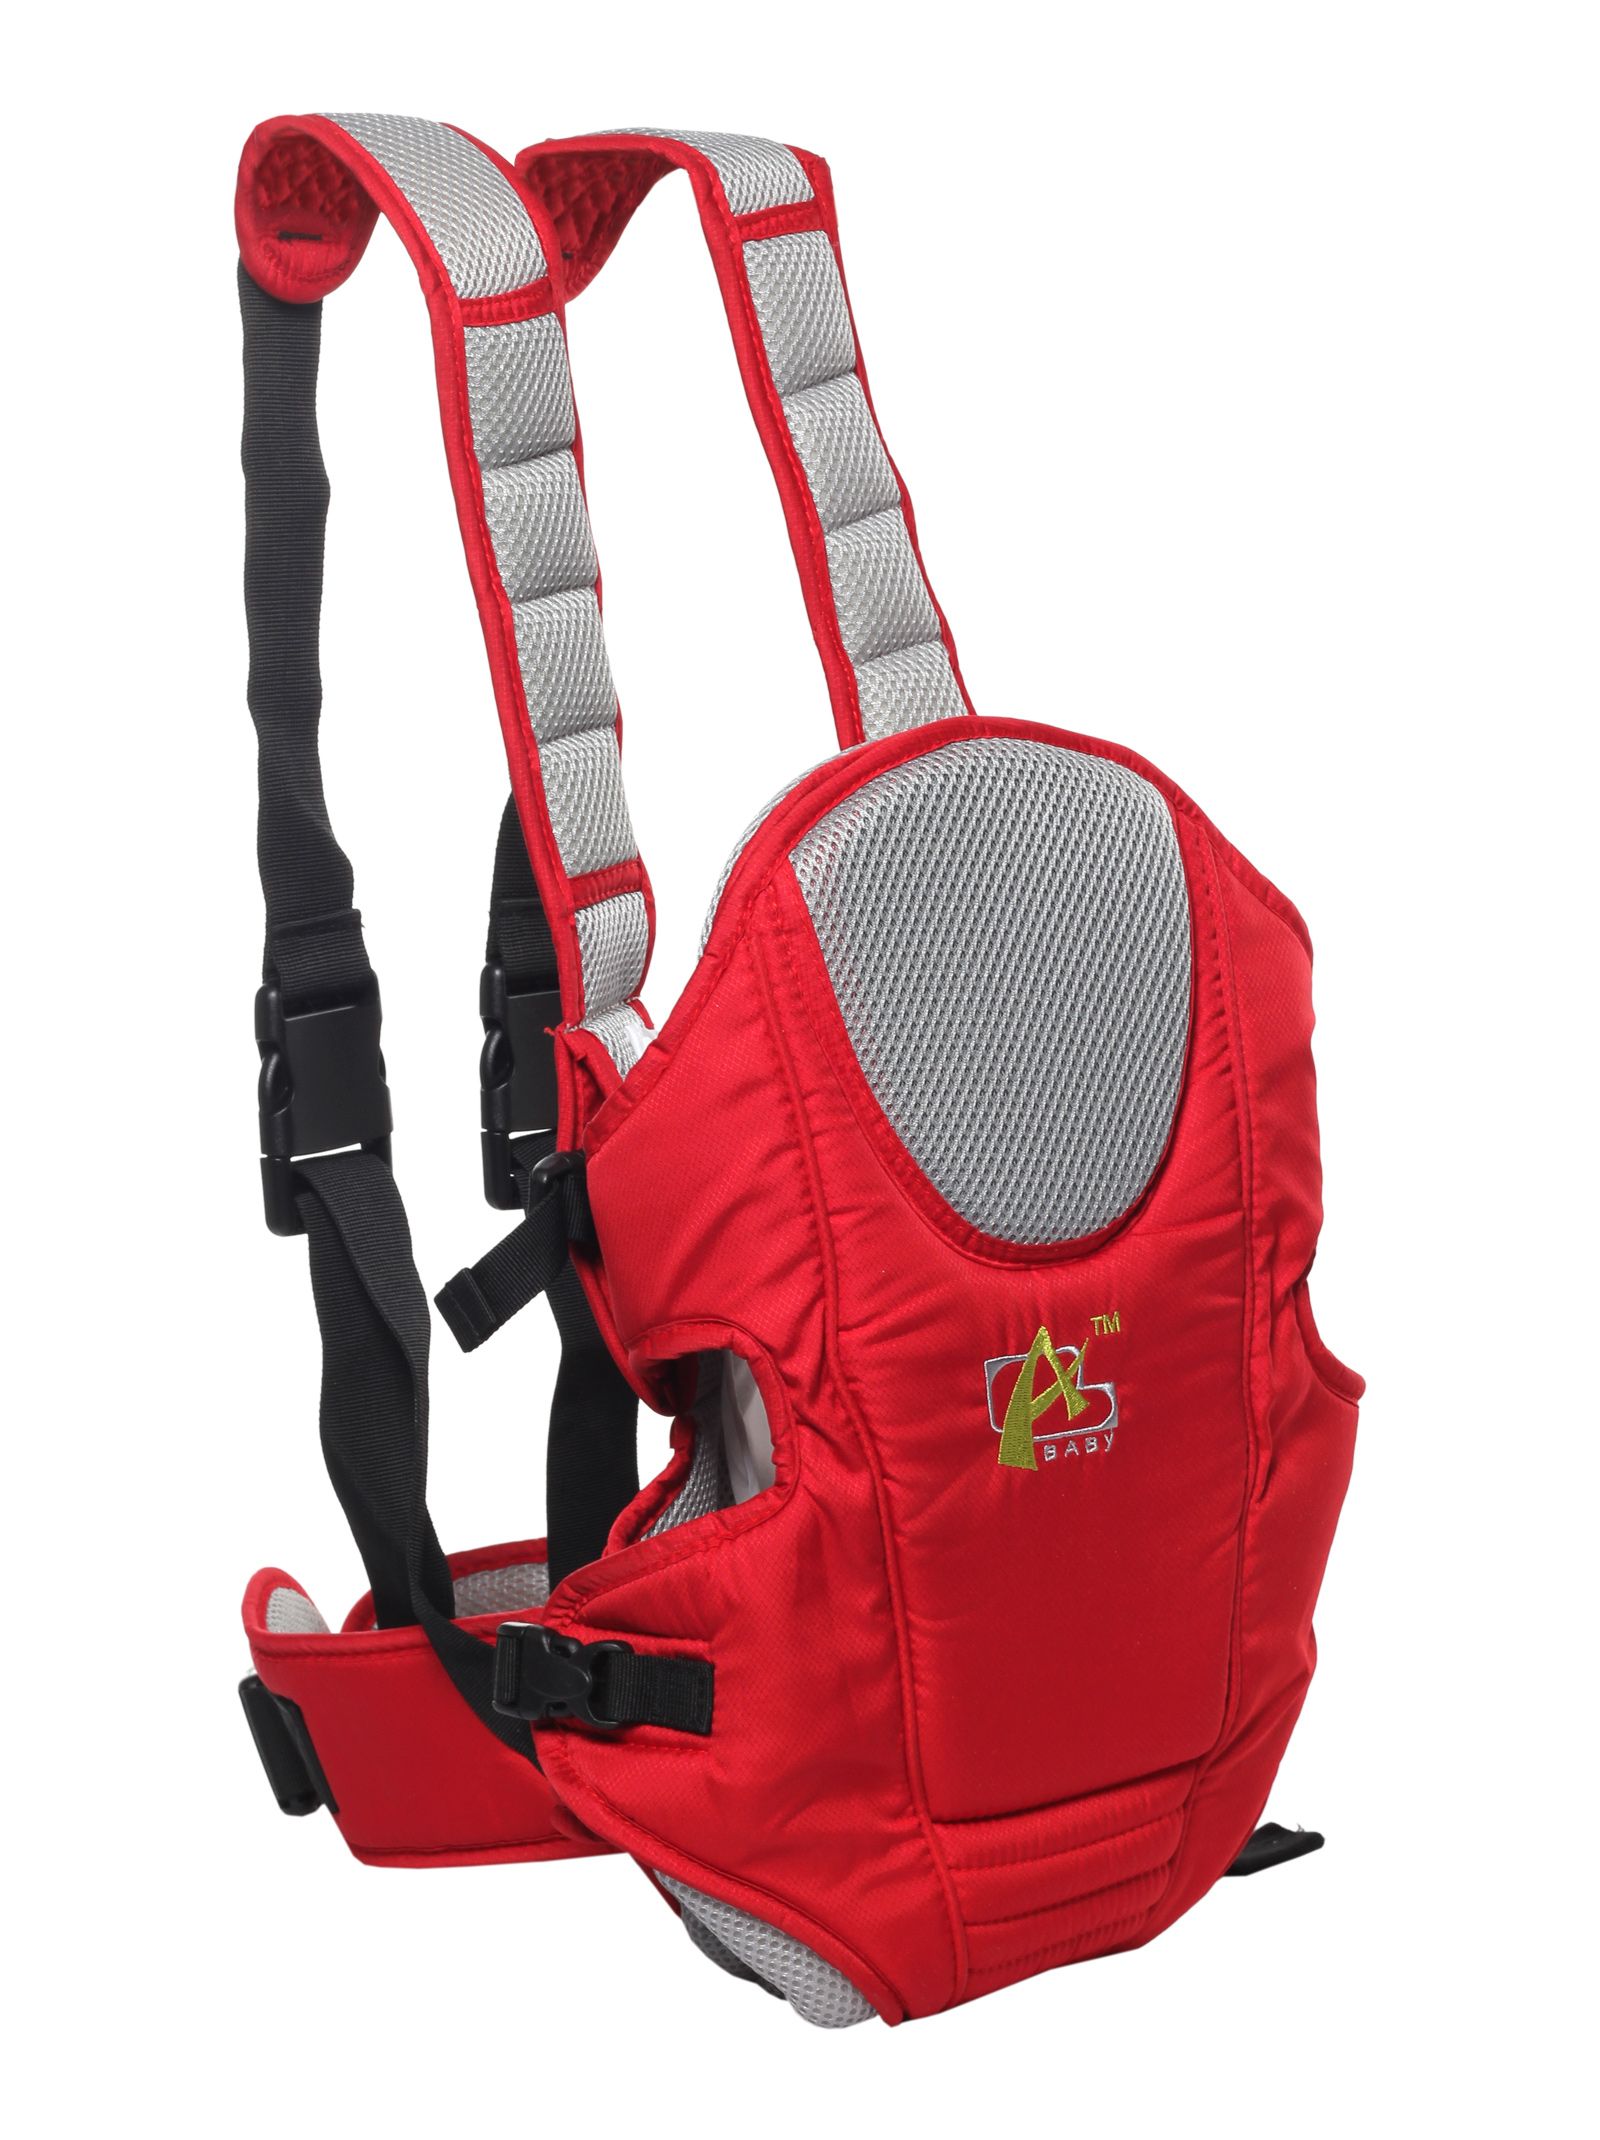 Advance Baby Baby Carrier - Red